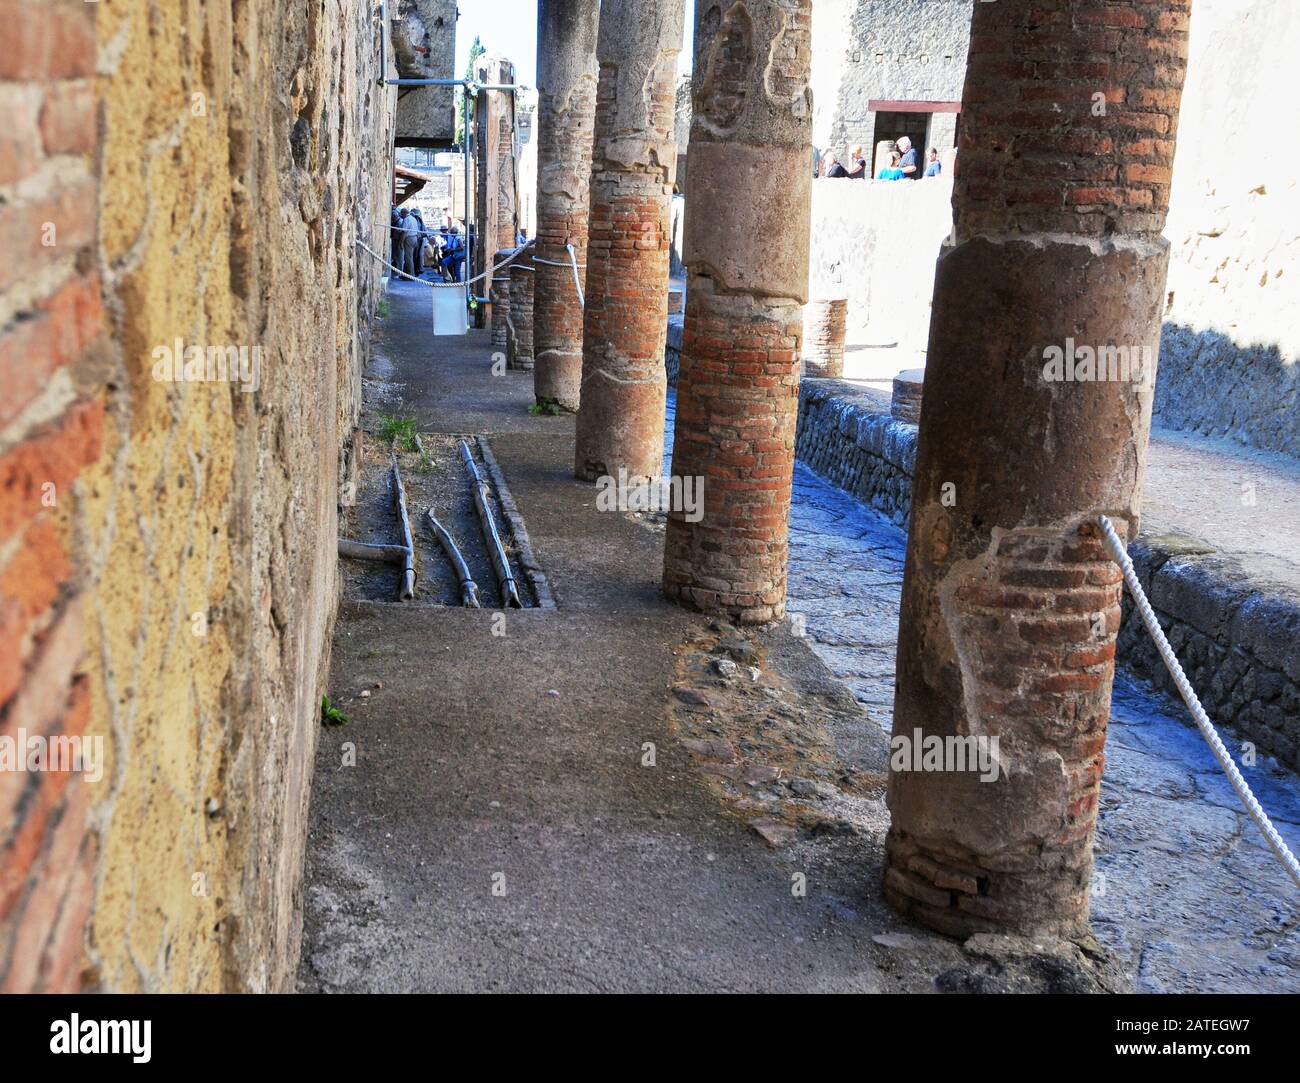 Italy, Naples, Herculaneum: Exposed Section of the Extensive Under-street Plumbing. Stock Photo